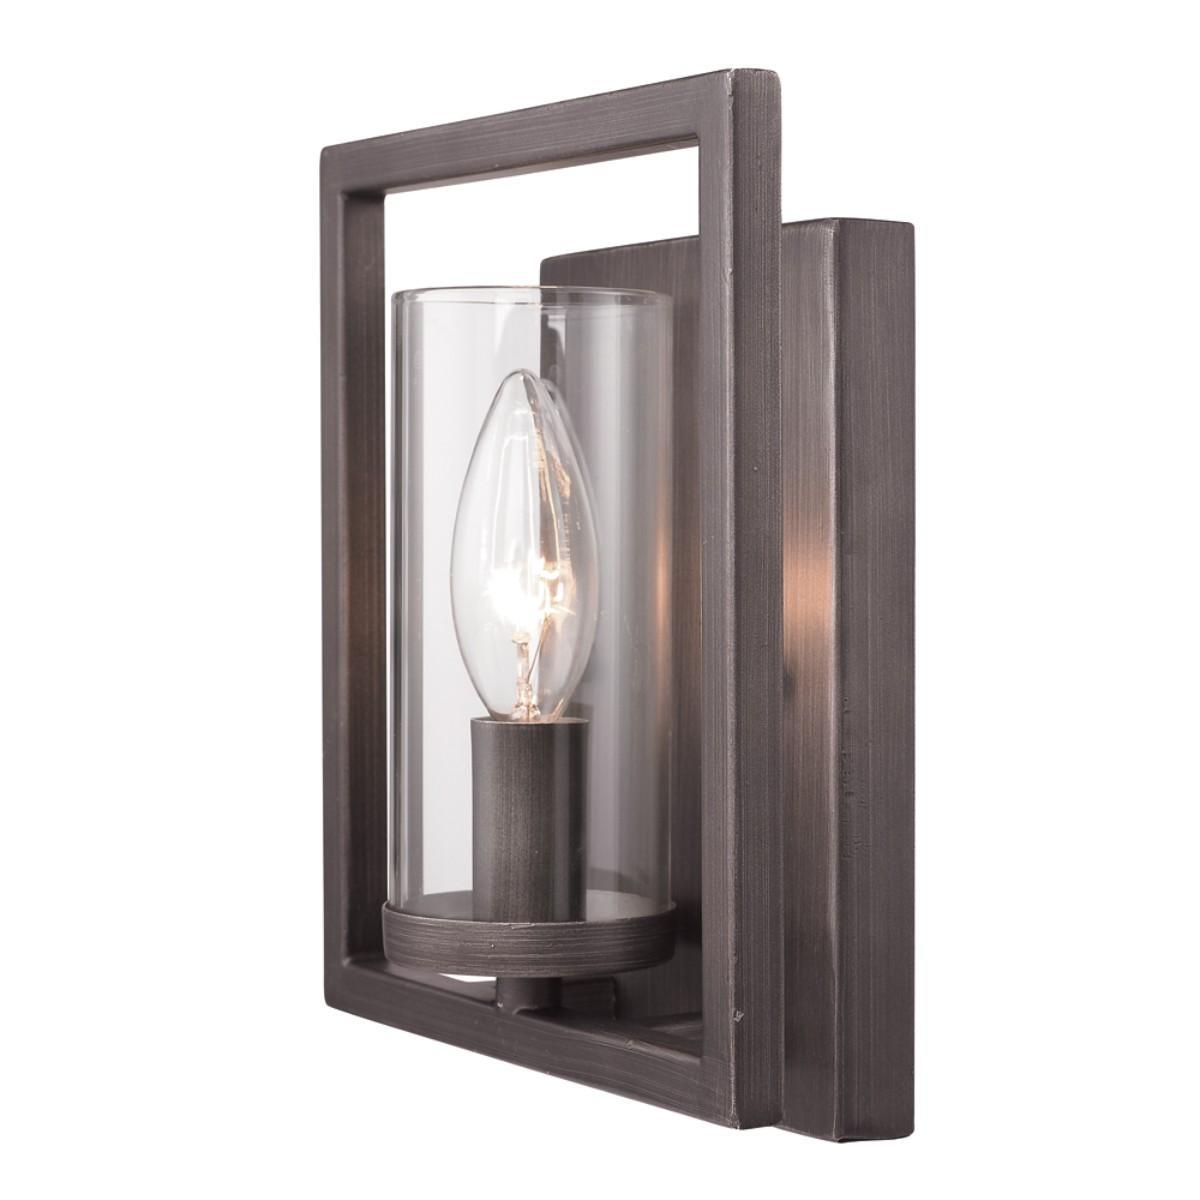 Marco 9 in. Flush Mount Sconce